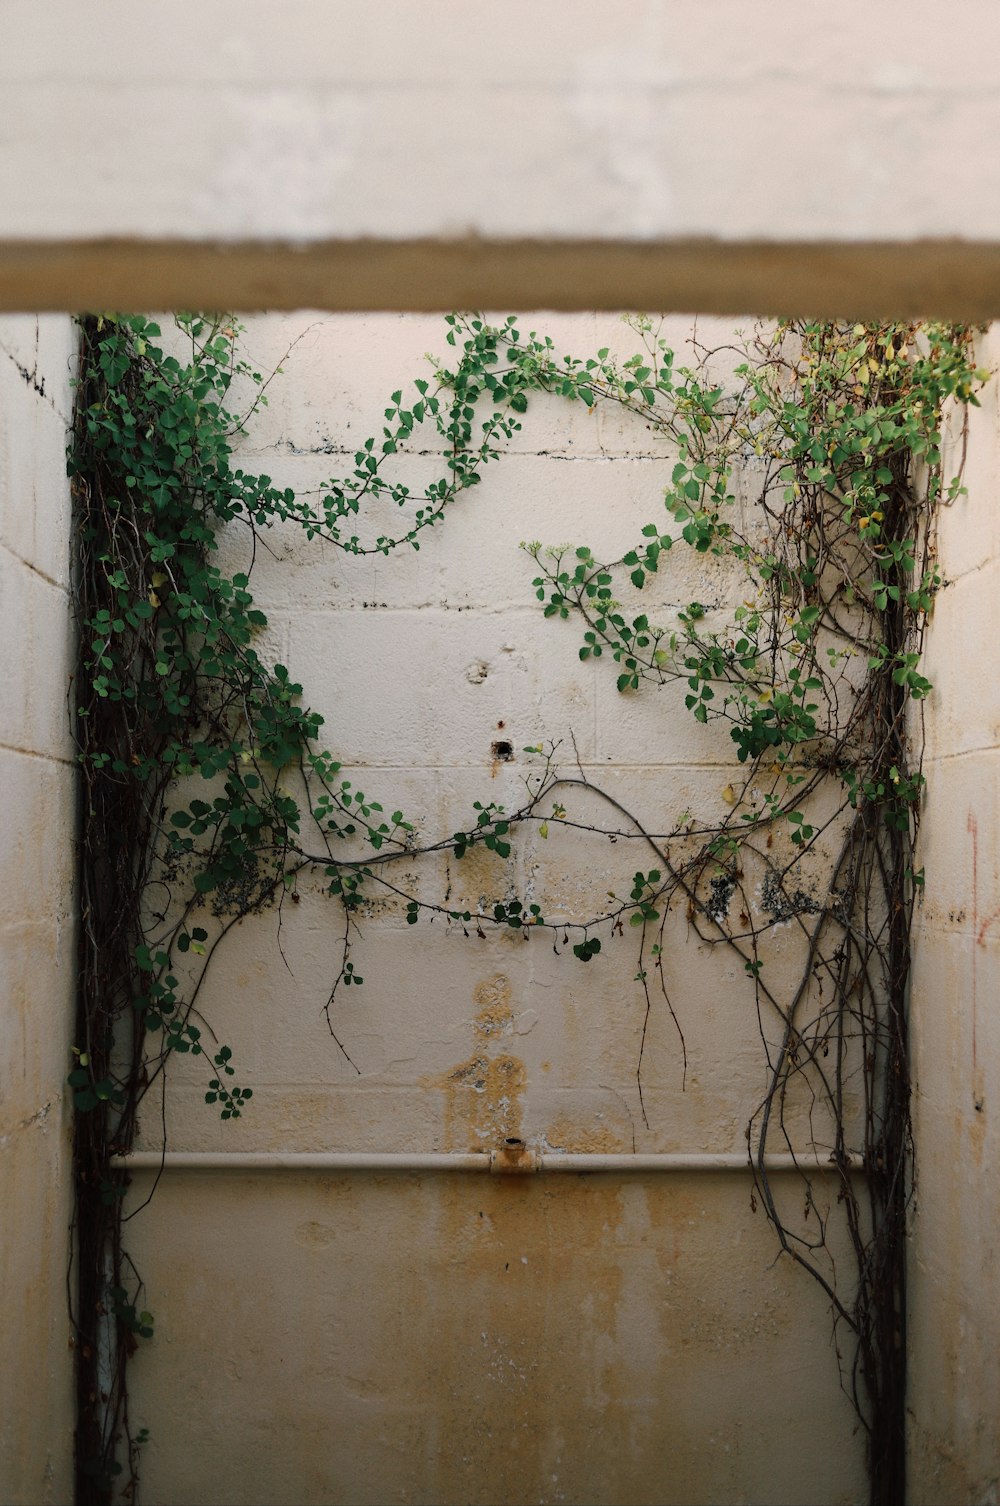 a wall with vines growing on it